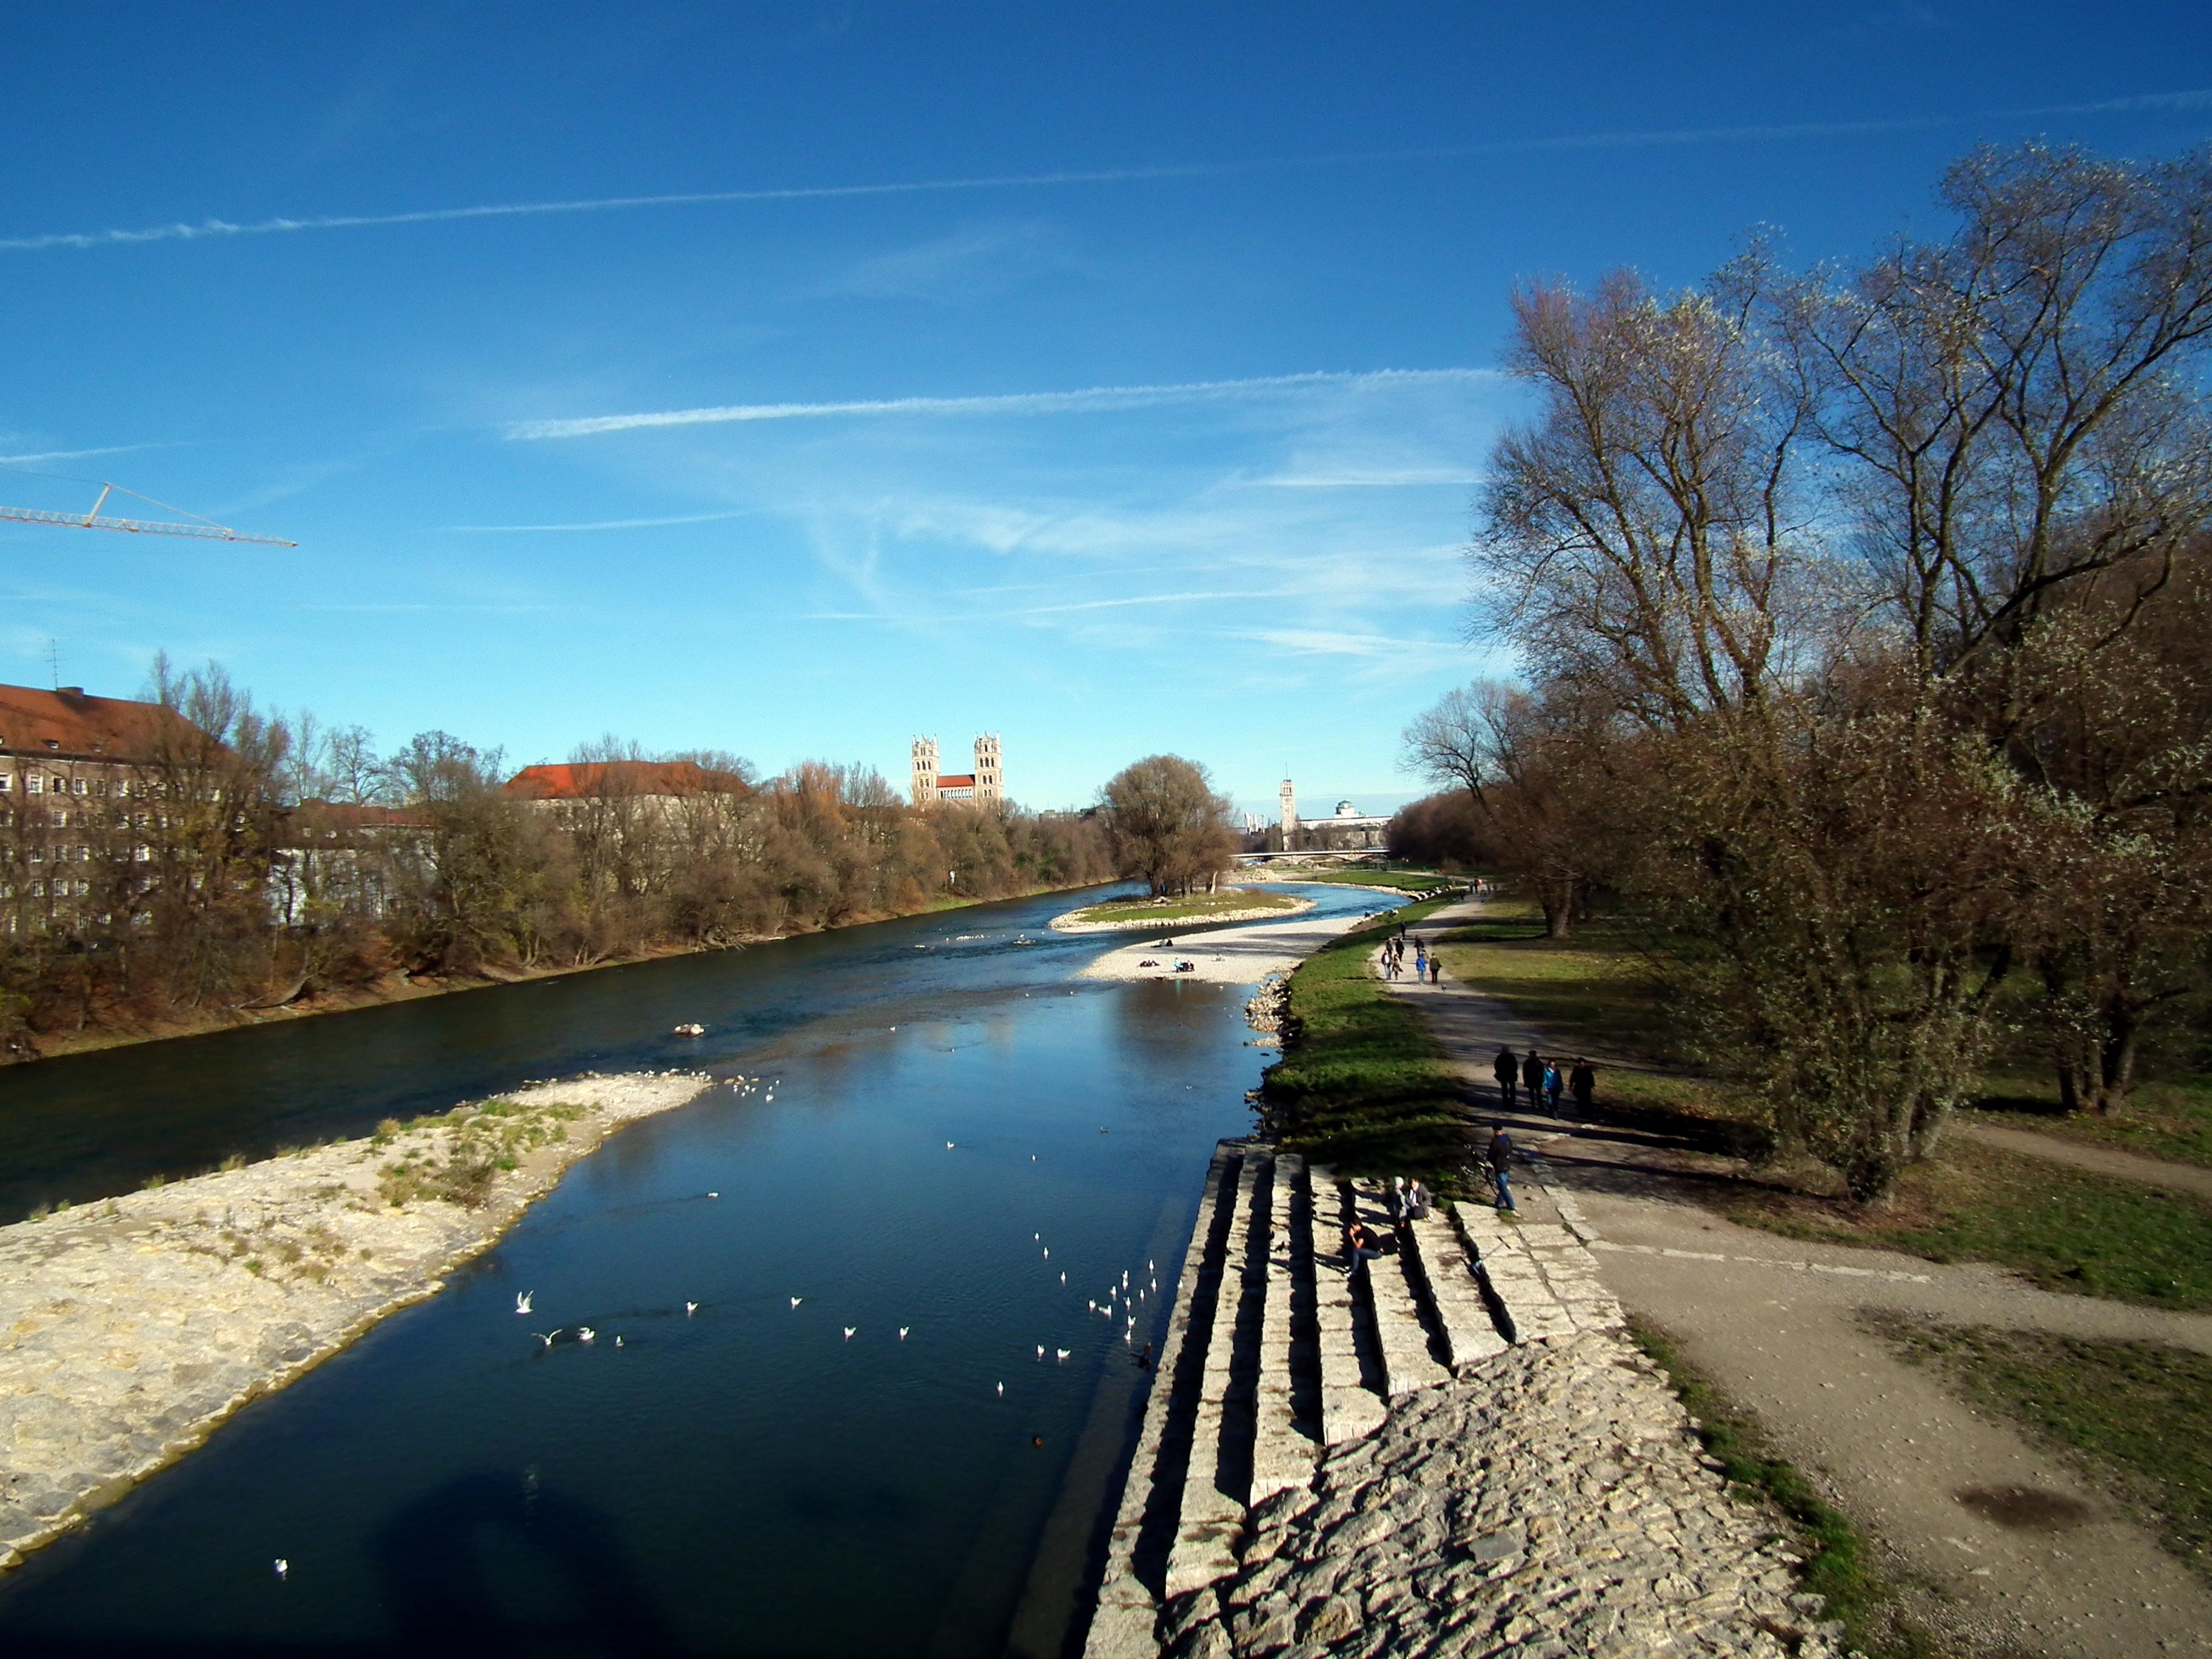 Cover image of this place Isar